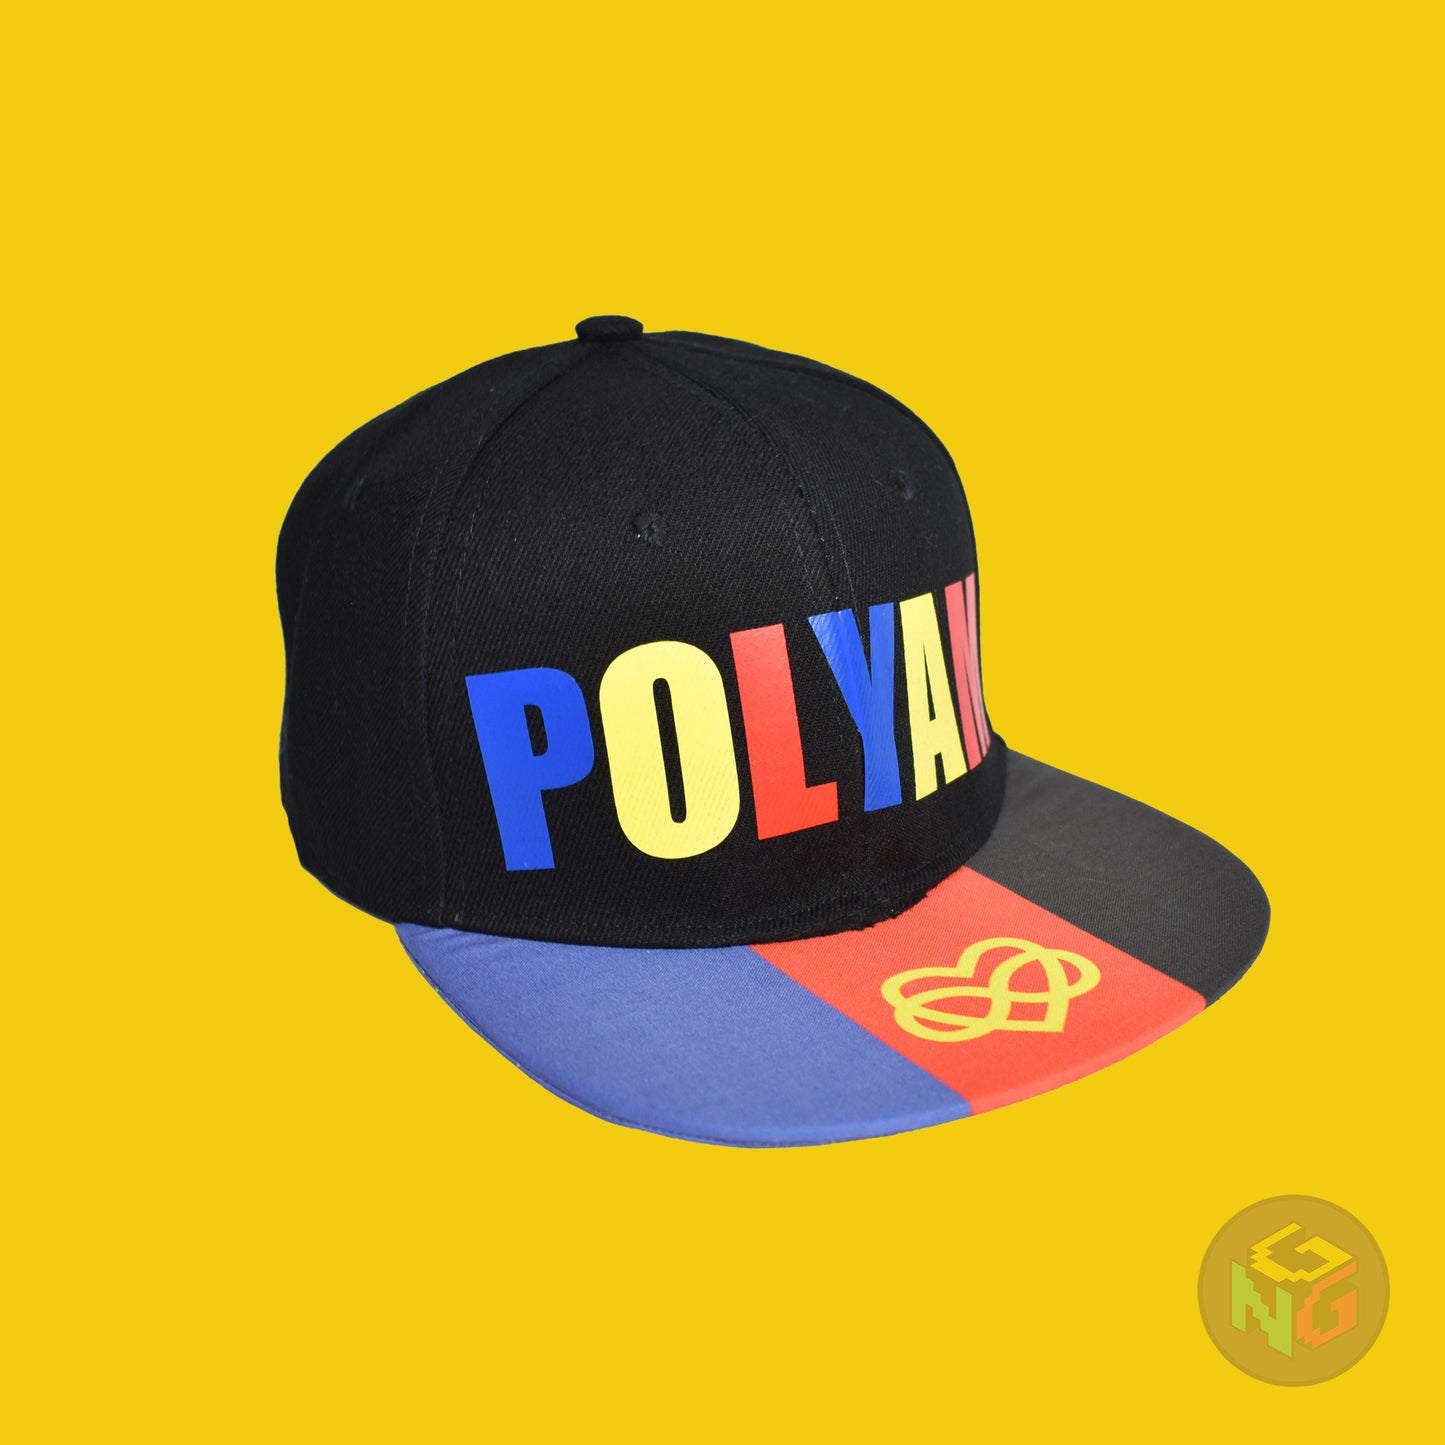 Black flat bill snapback hat. The brim has the polyamory pride flag with the heart infinity symbol on both sides and the front of the hat has the word “POLYAM” in red, yellow, and blue letters. Front right view